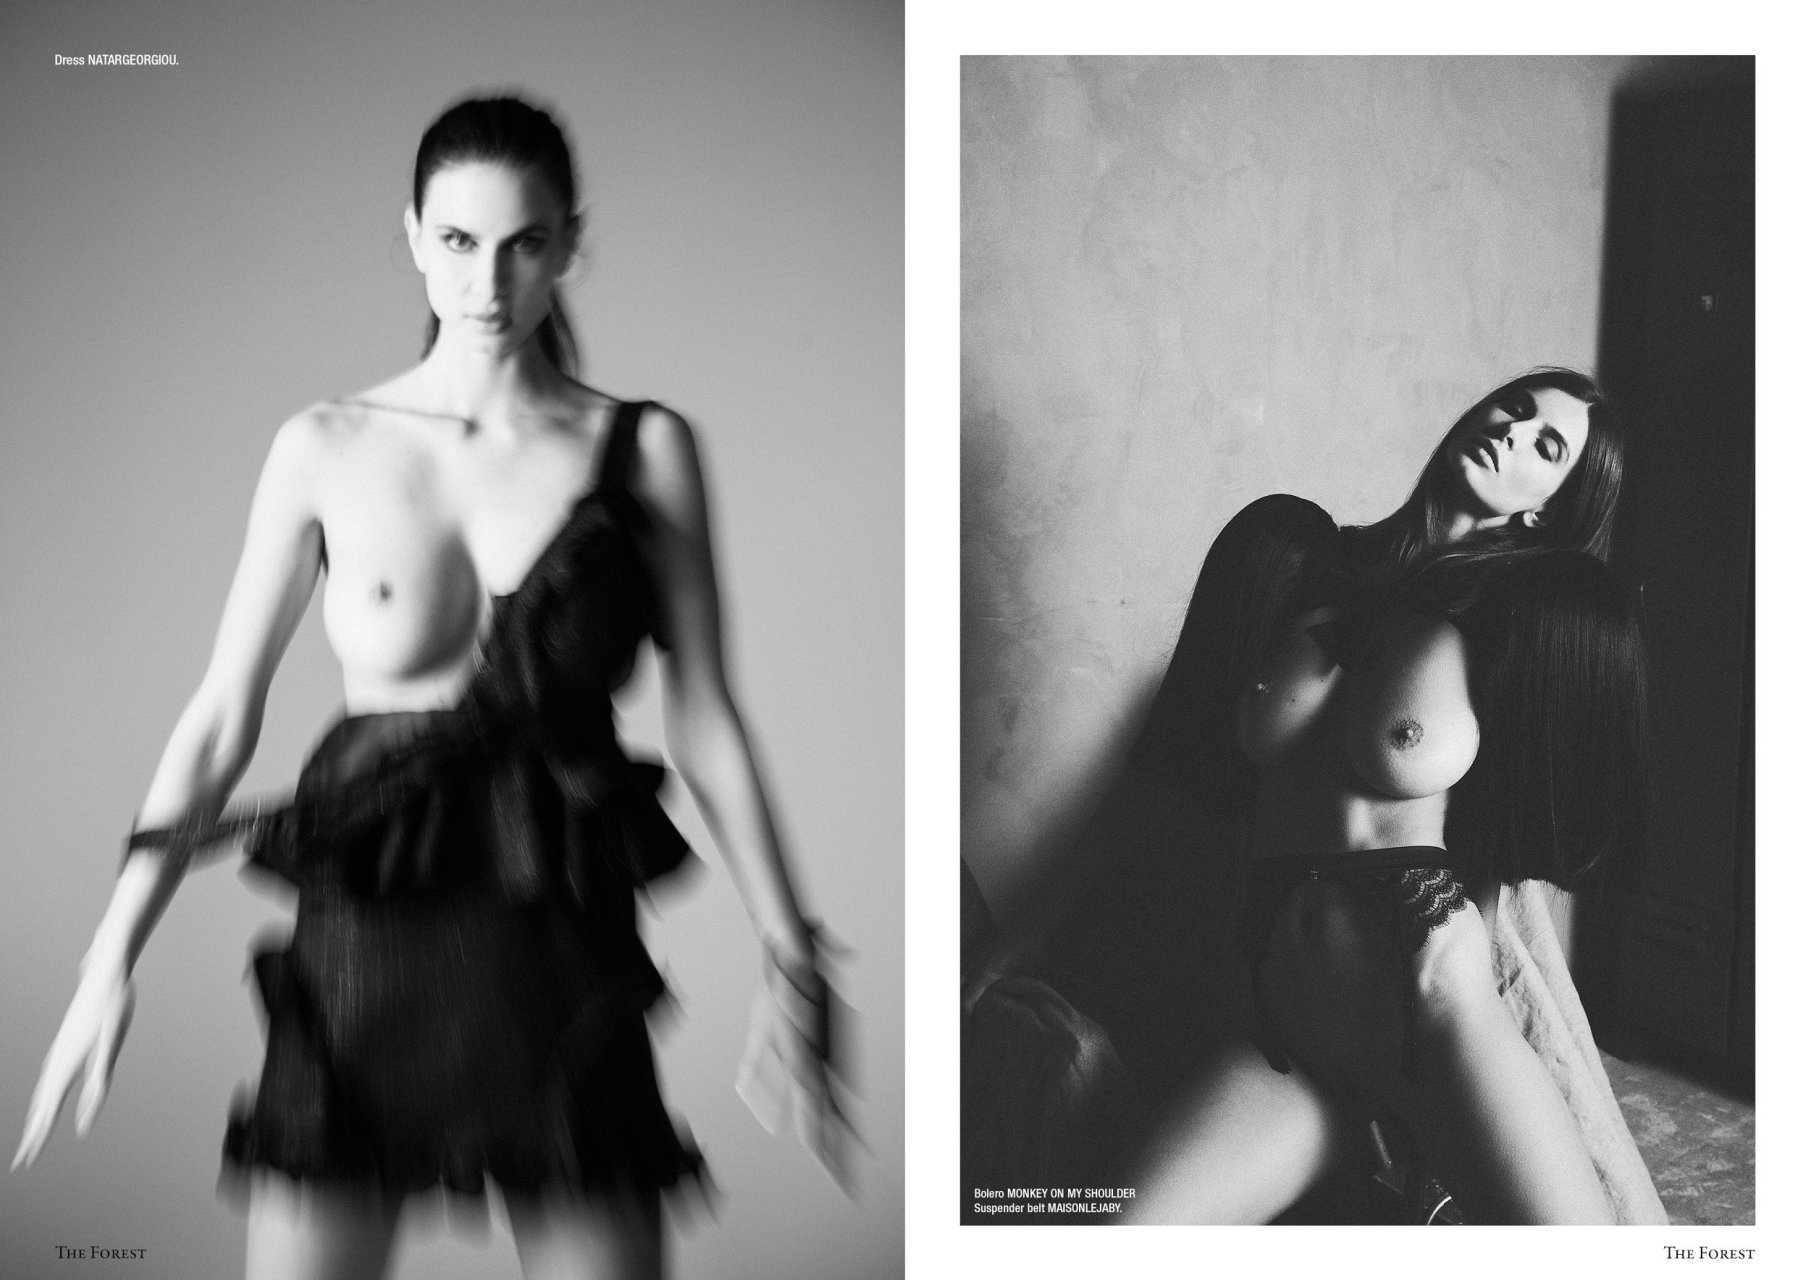 Here’re new nude and sexy B&W photos of Alexandra Zimny by Francois Ber...